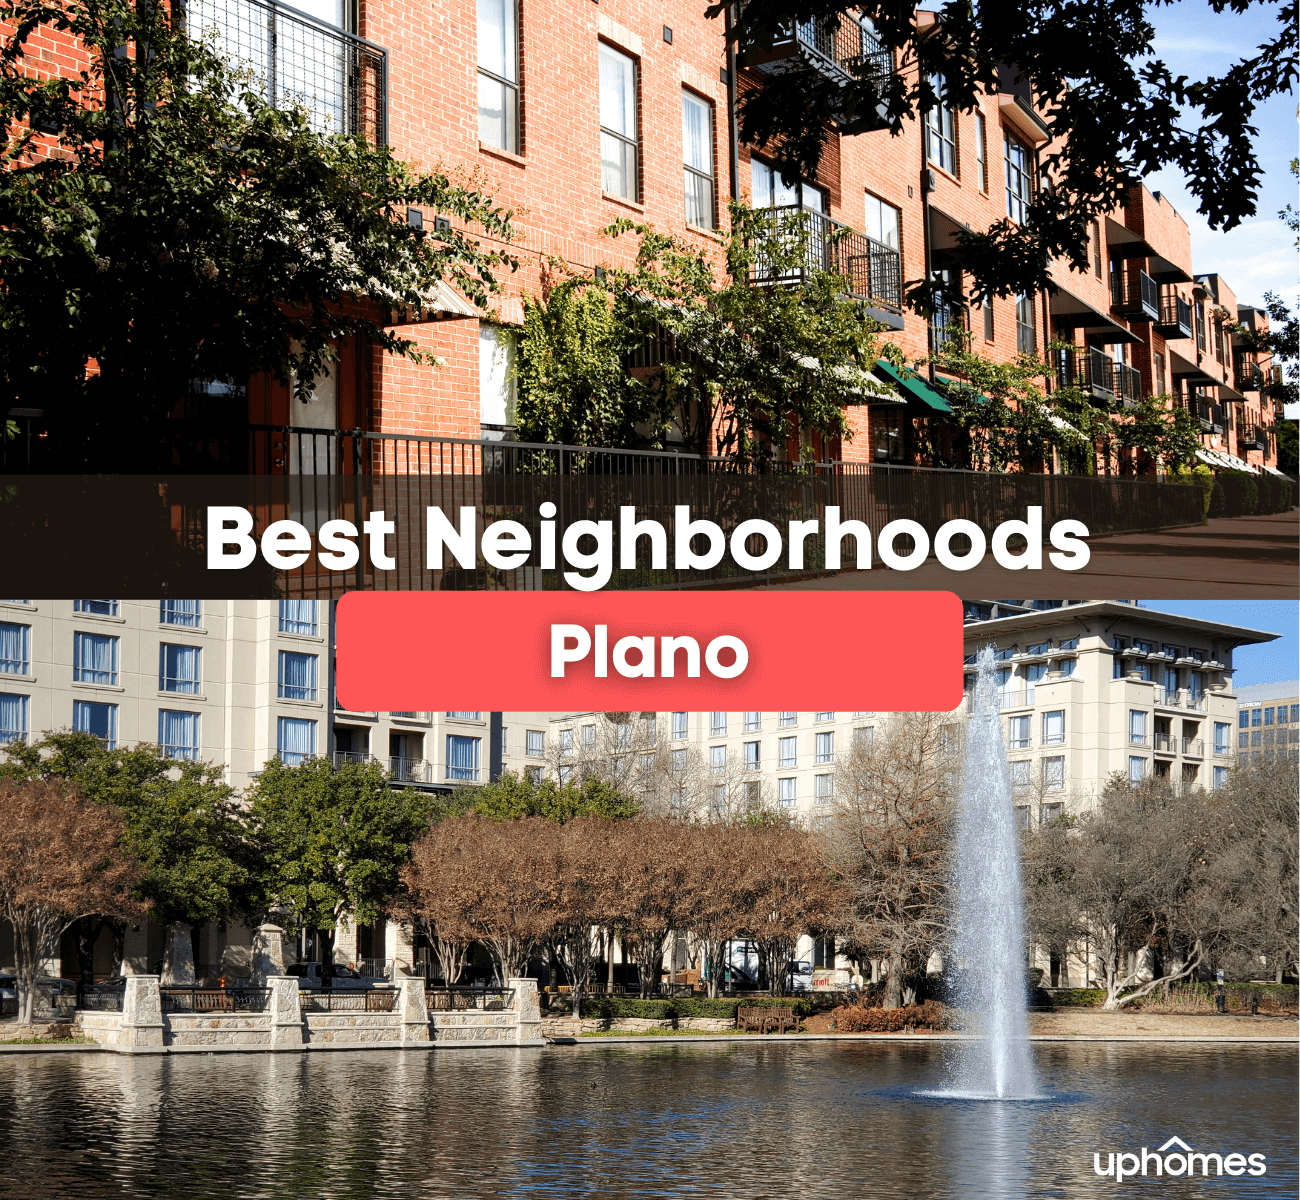 Best Neighborhoods in Plano, TX - What are the best places to live in Plano, Texas?